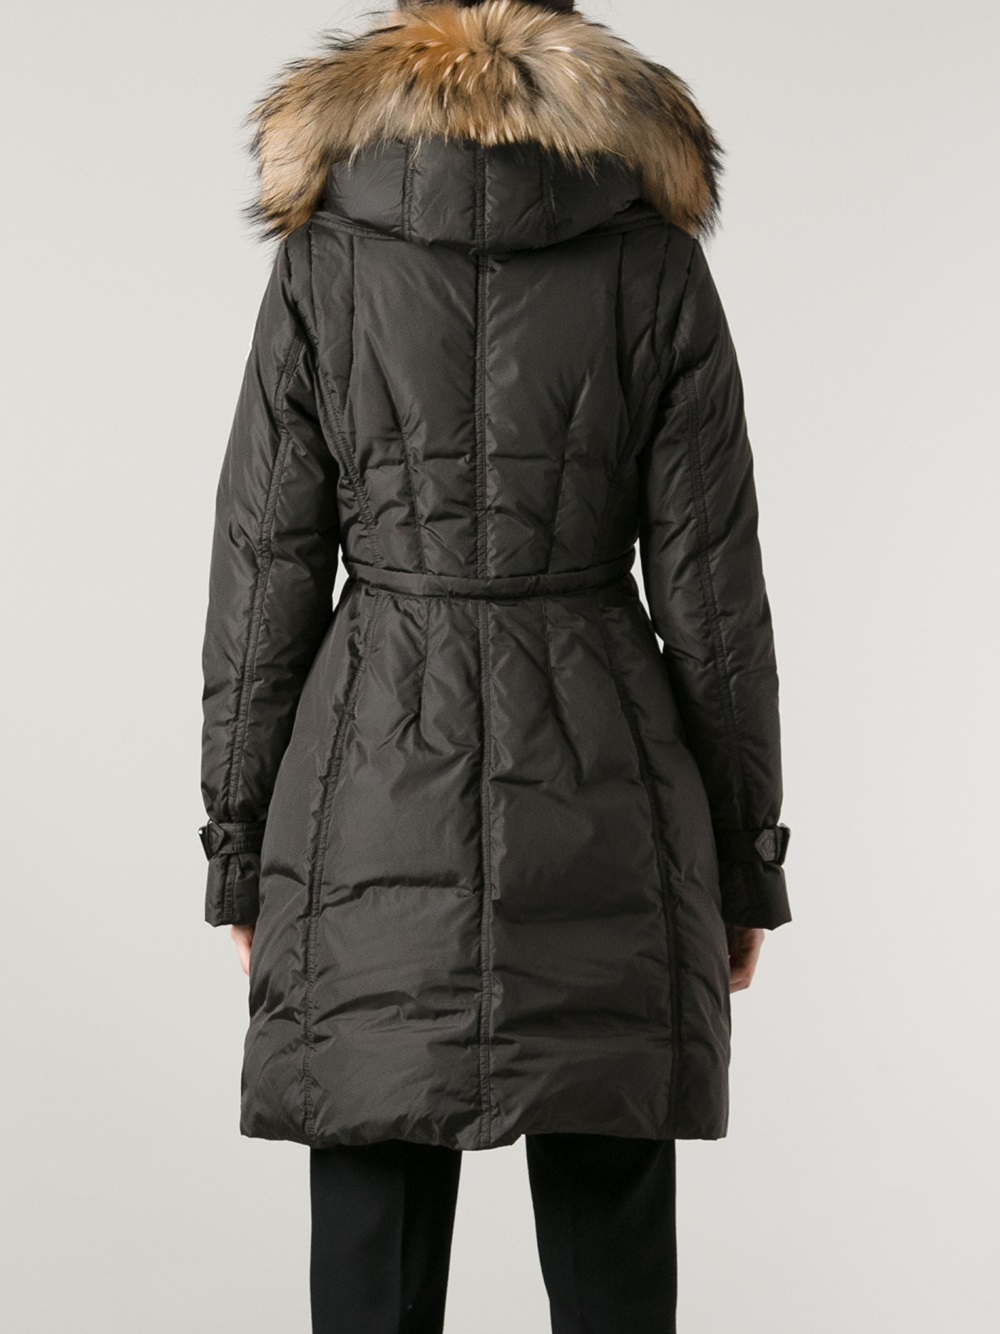 Moncler Phalangere Feather Down Coat in Green | Lyst